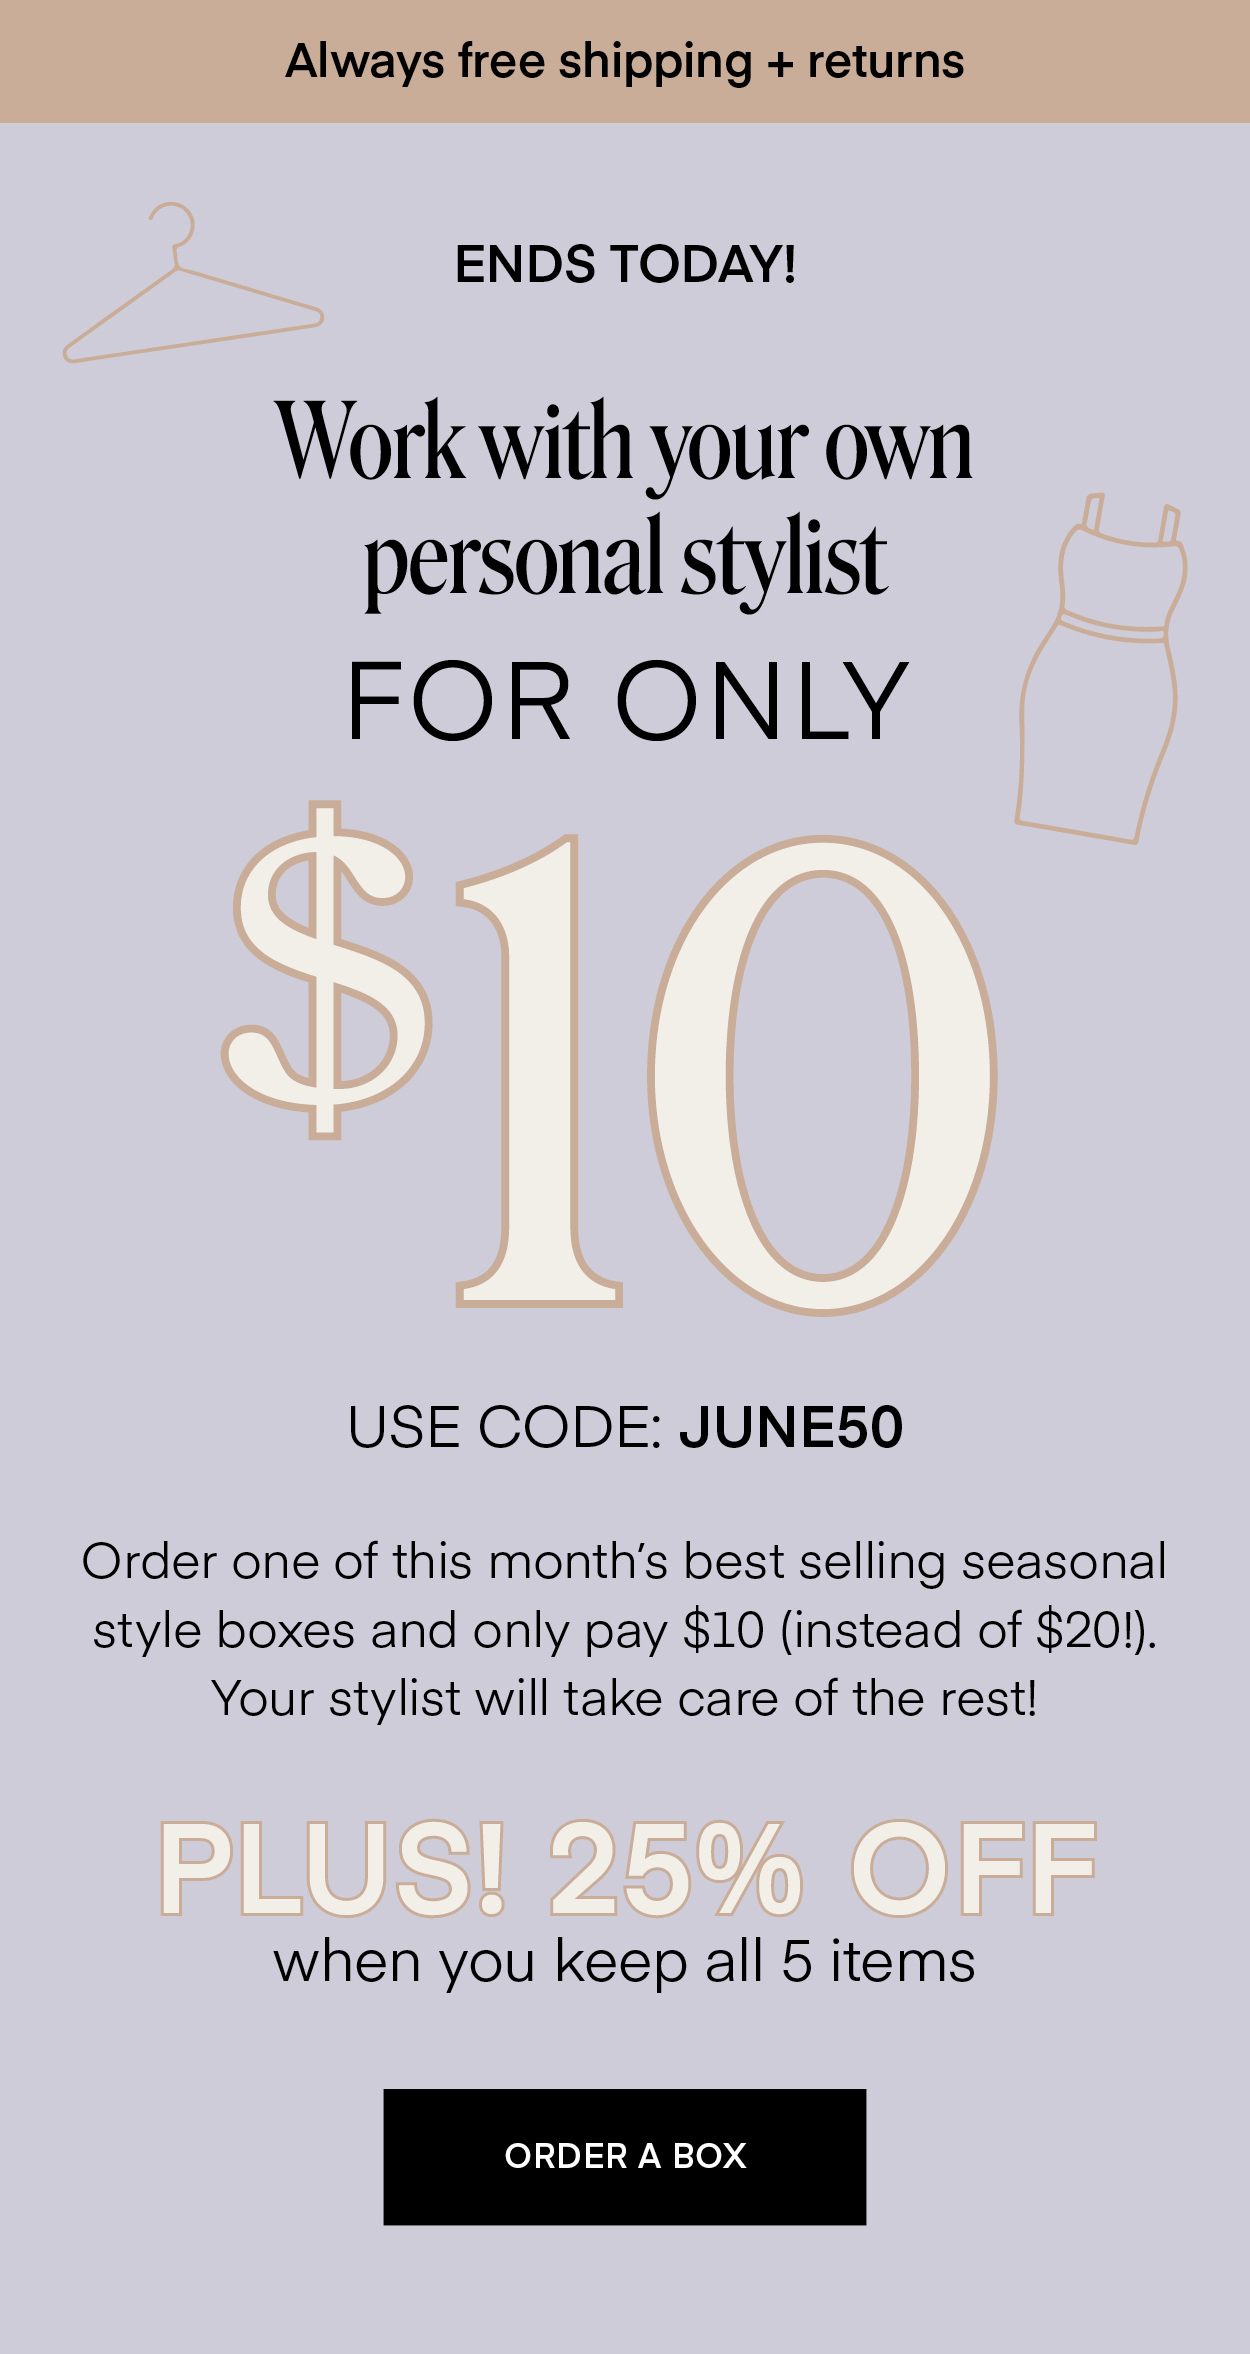 Always free shipping + returns ENDS TONIGHT! Work with your own personal stylist FOR ONLY $10 USE CODE: JUNE50 Order one of this month's best selling seasonal style boxes and only pay $10 (instead of $20!). Your stylist will take care of the rest! PLUS! 25% OFF when you keep all 5 items ORDER A BOX